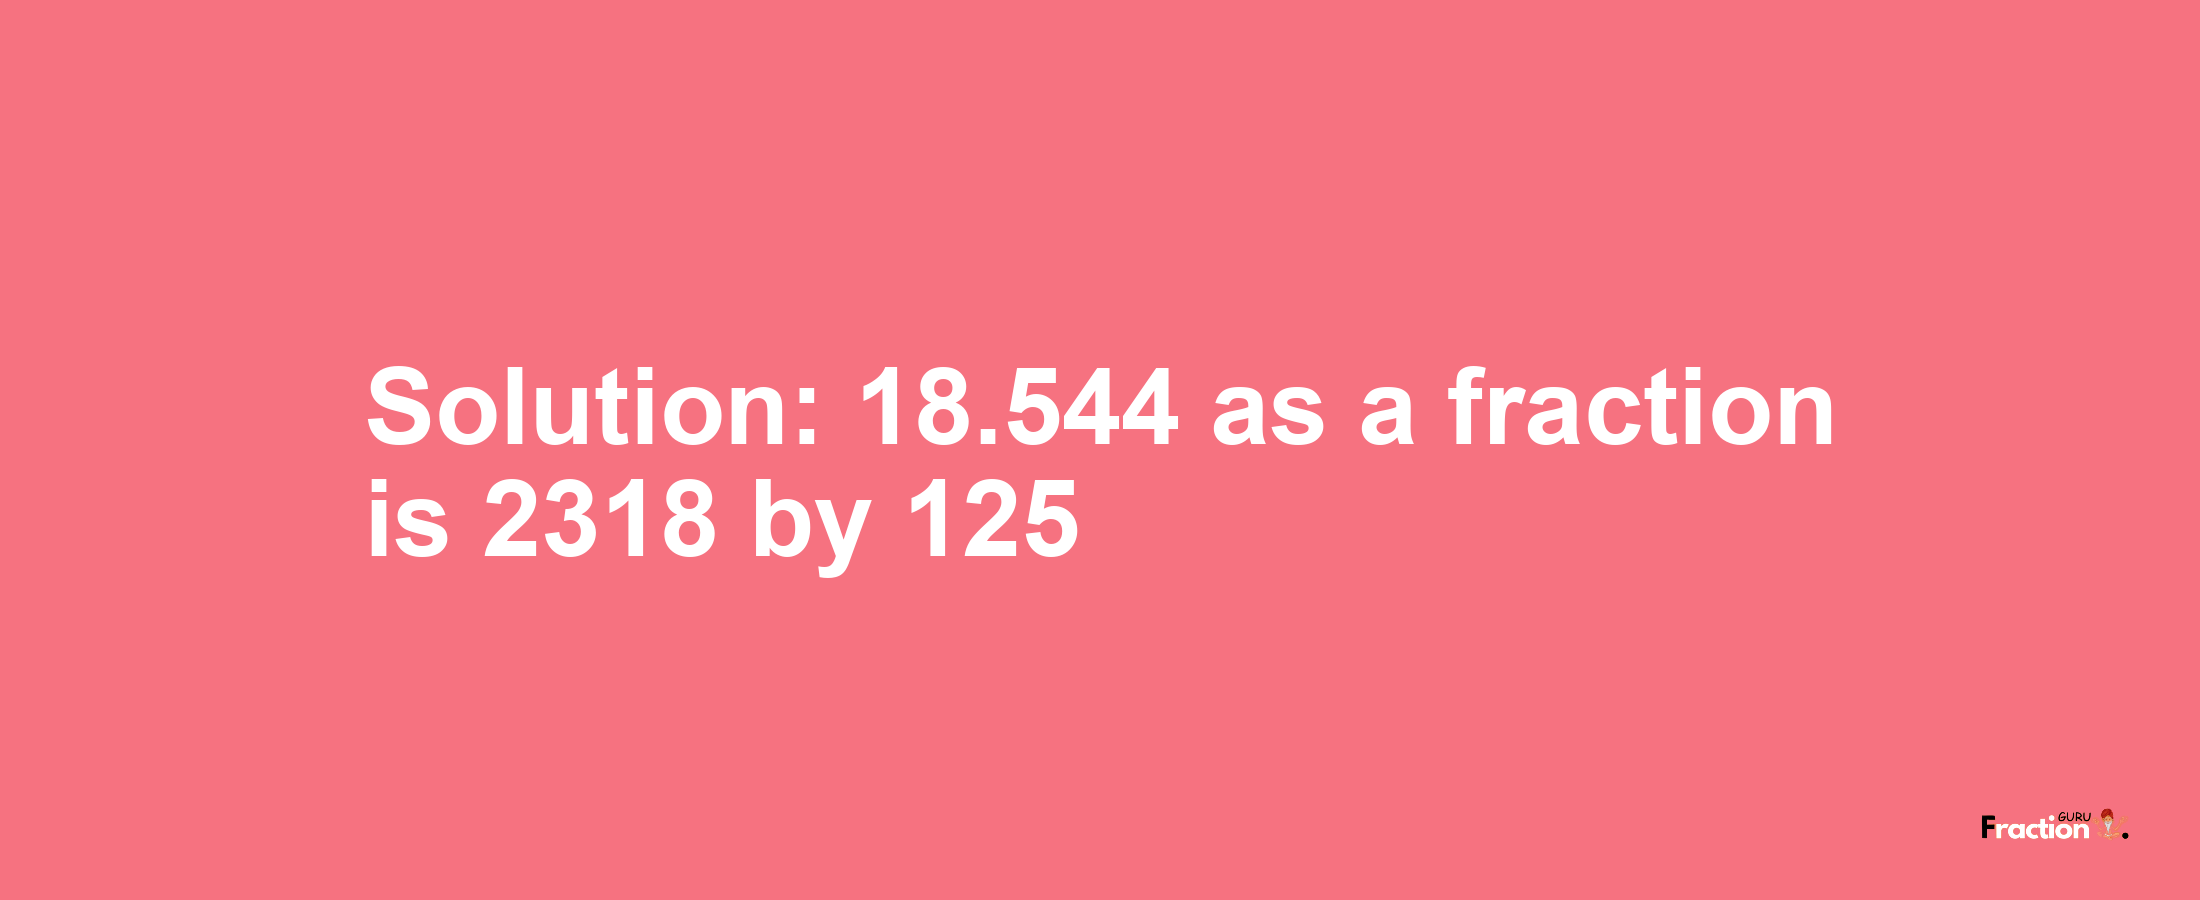 Solution:18.544 as a fraction is 2318/125